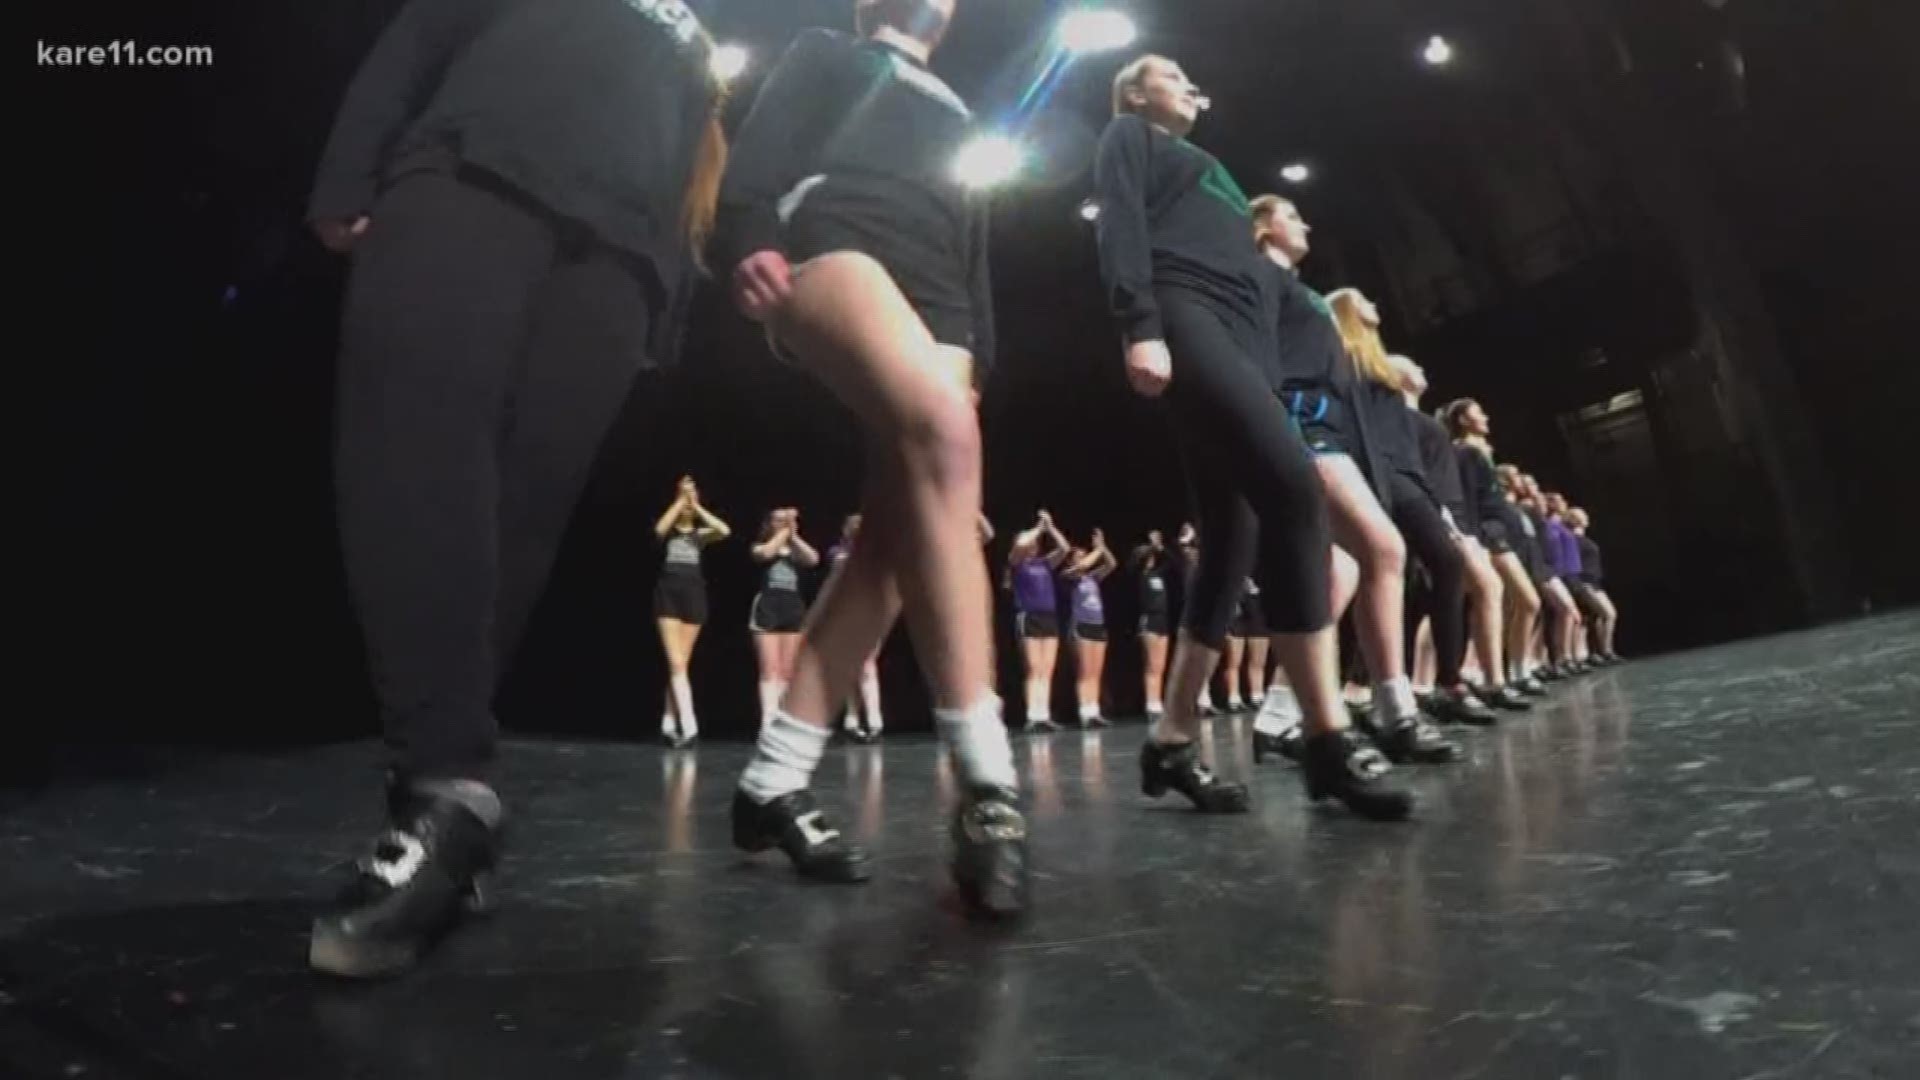 The world of Irish dancing from the lens of our super cool 360 camera